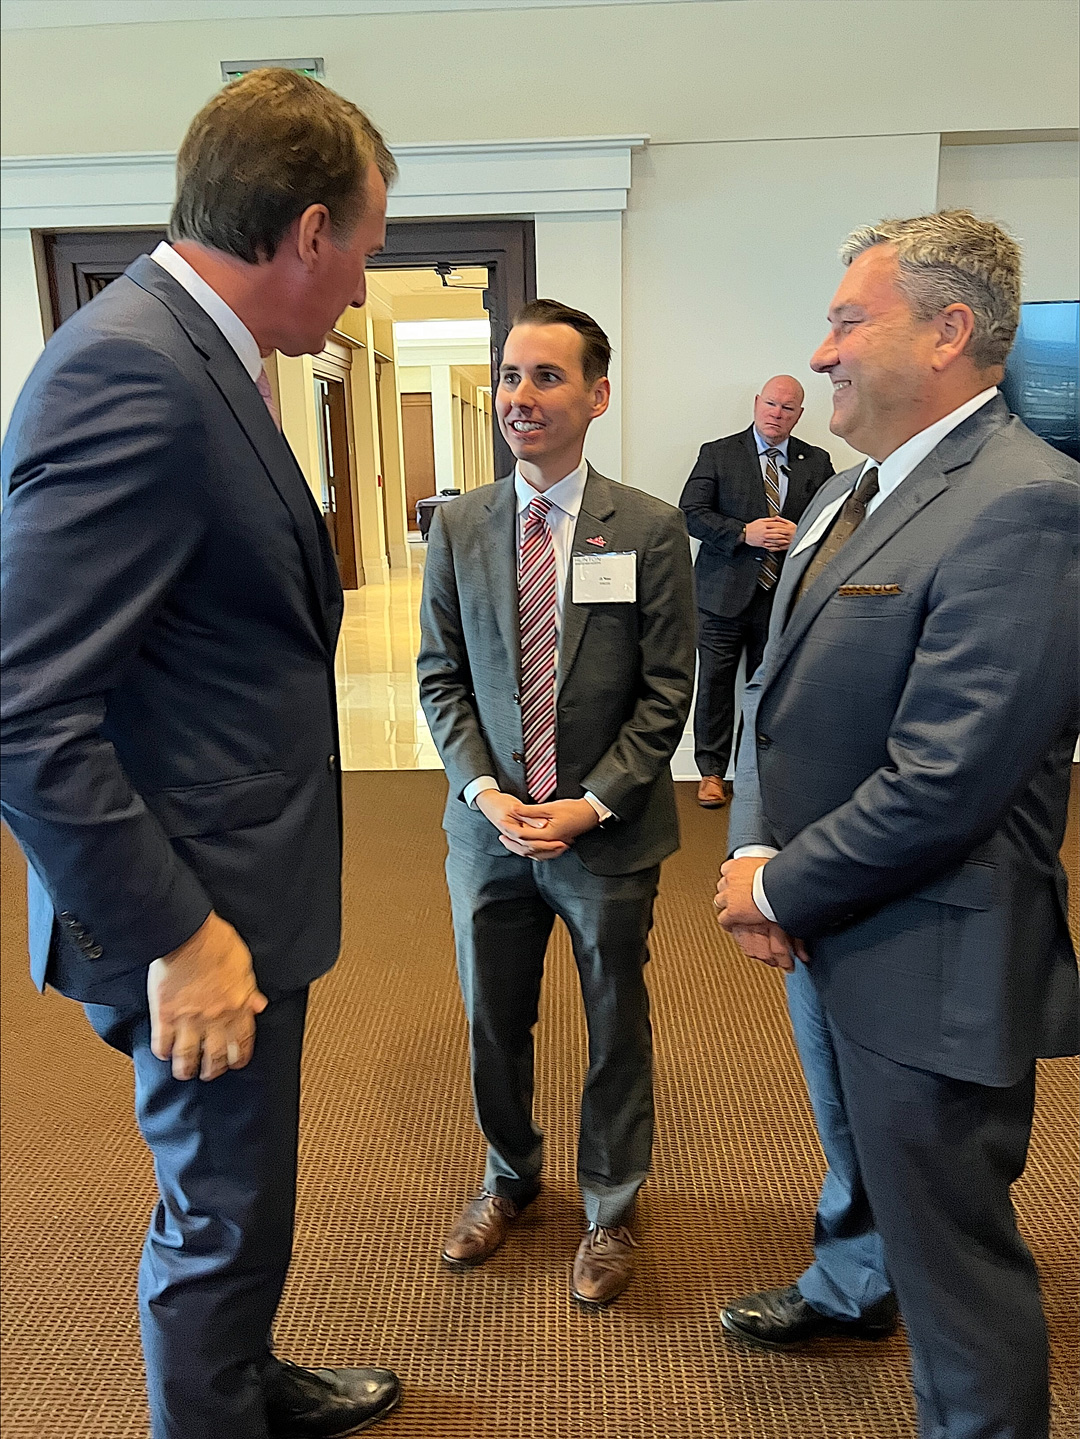 Northwest Federal Credit Union CEO and League Vice Chairman Jeff Bentley (pictured right) and League Chief Advocacy Officer JT Blau (center) met today with Gov. Glenn Youngkin at a breakfast event hosted by the Hunton Andrews Kurth, our lobbying firm.